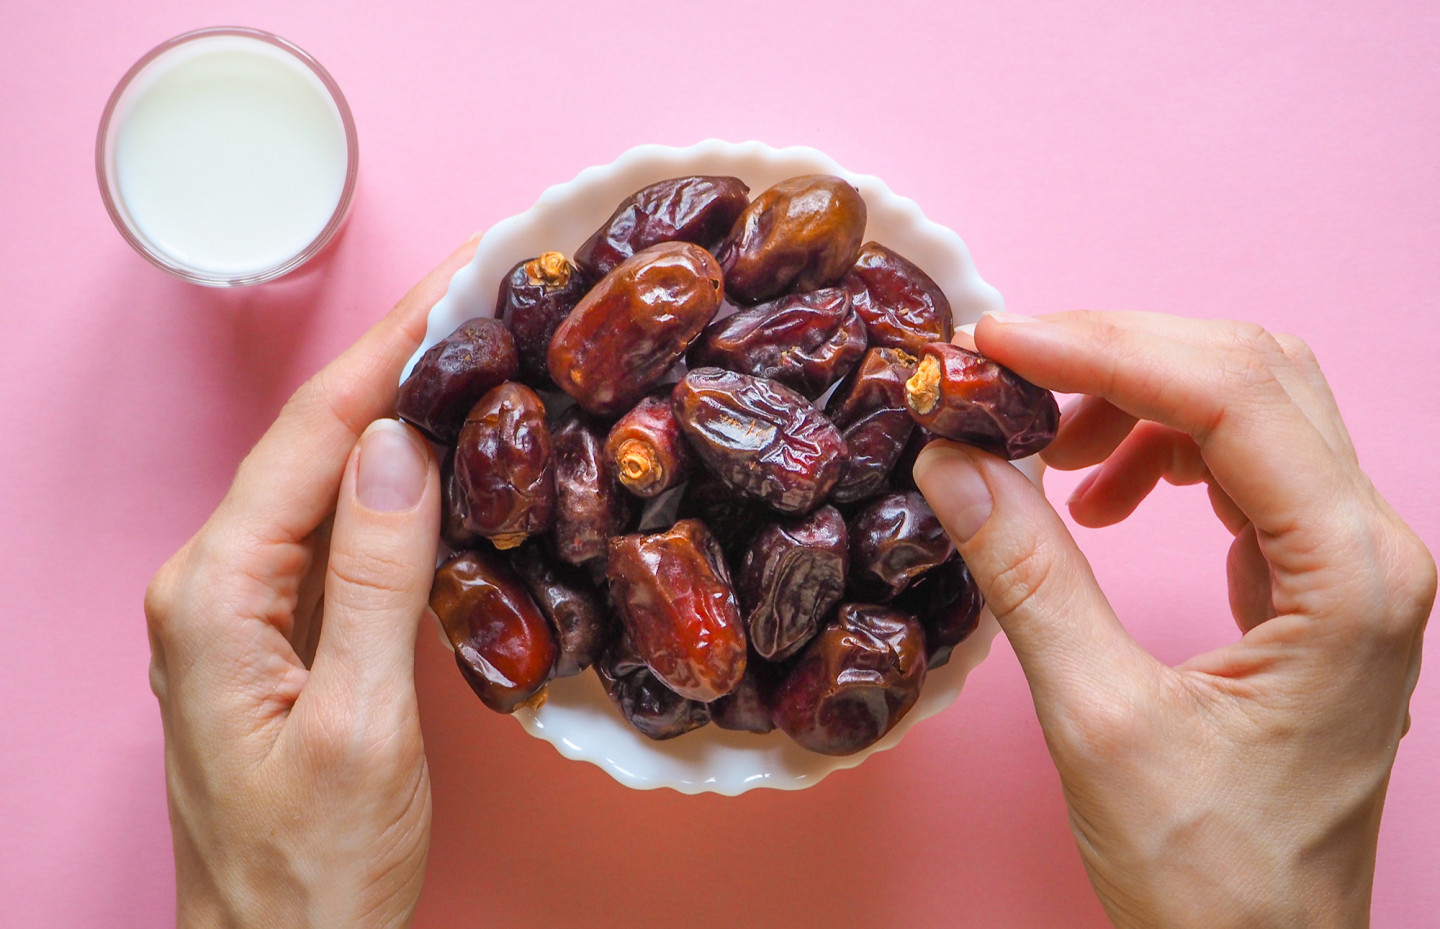 The benefits and harms of dates: 8 scientific facts